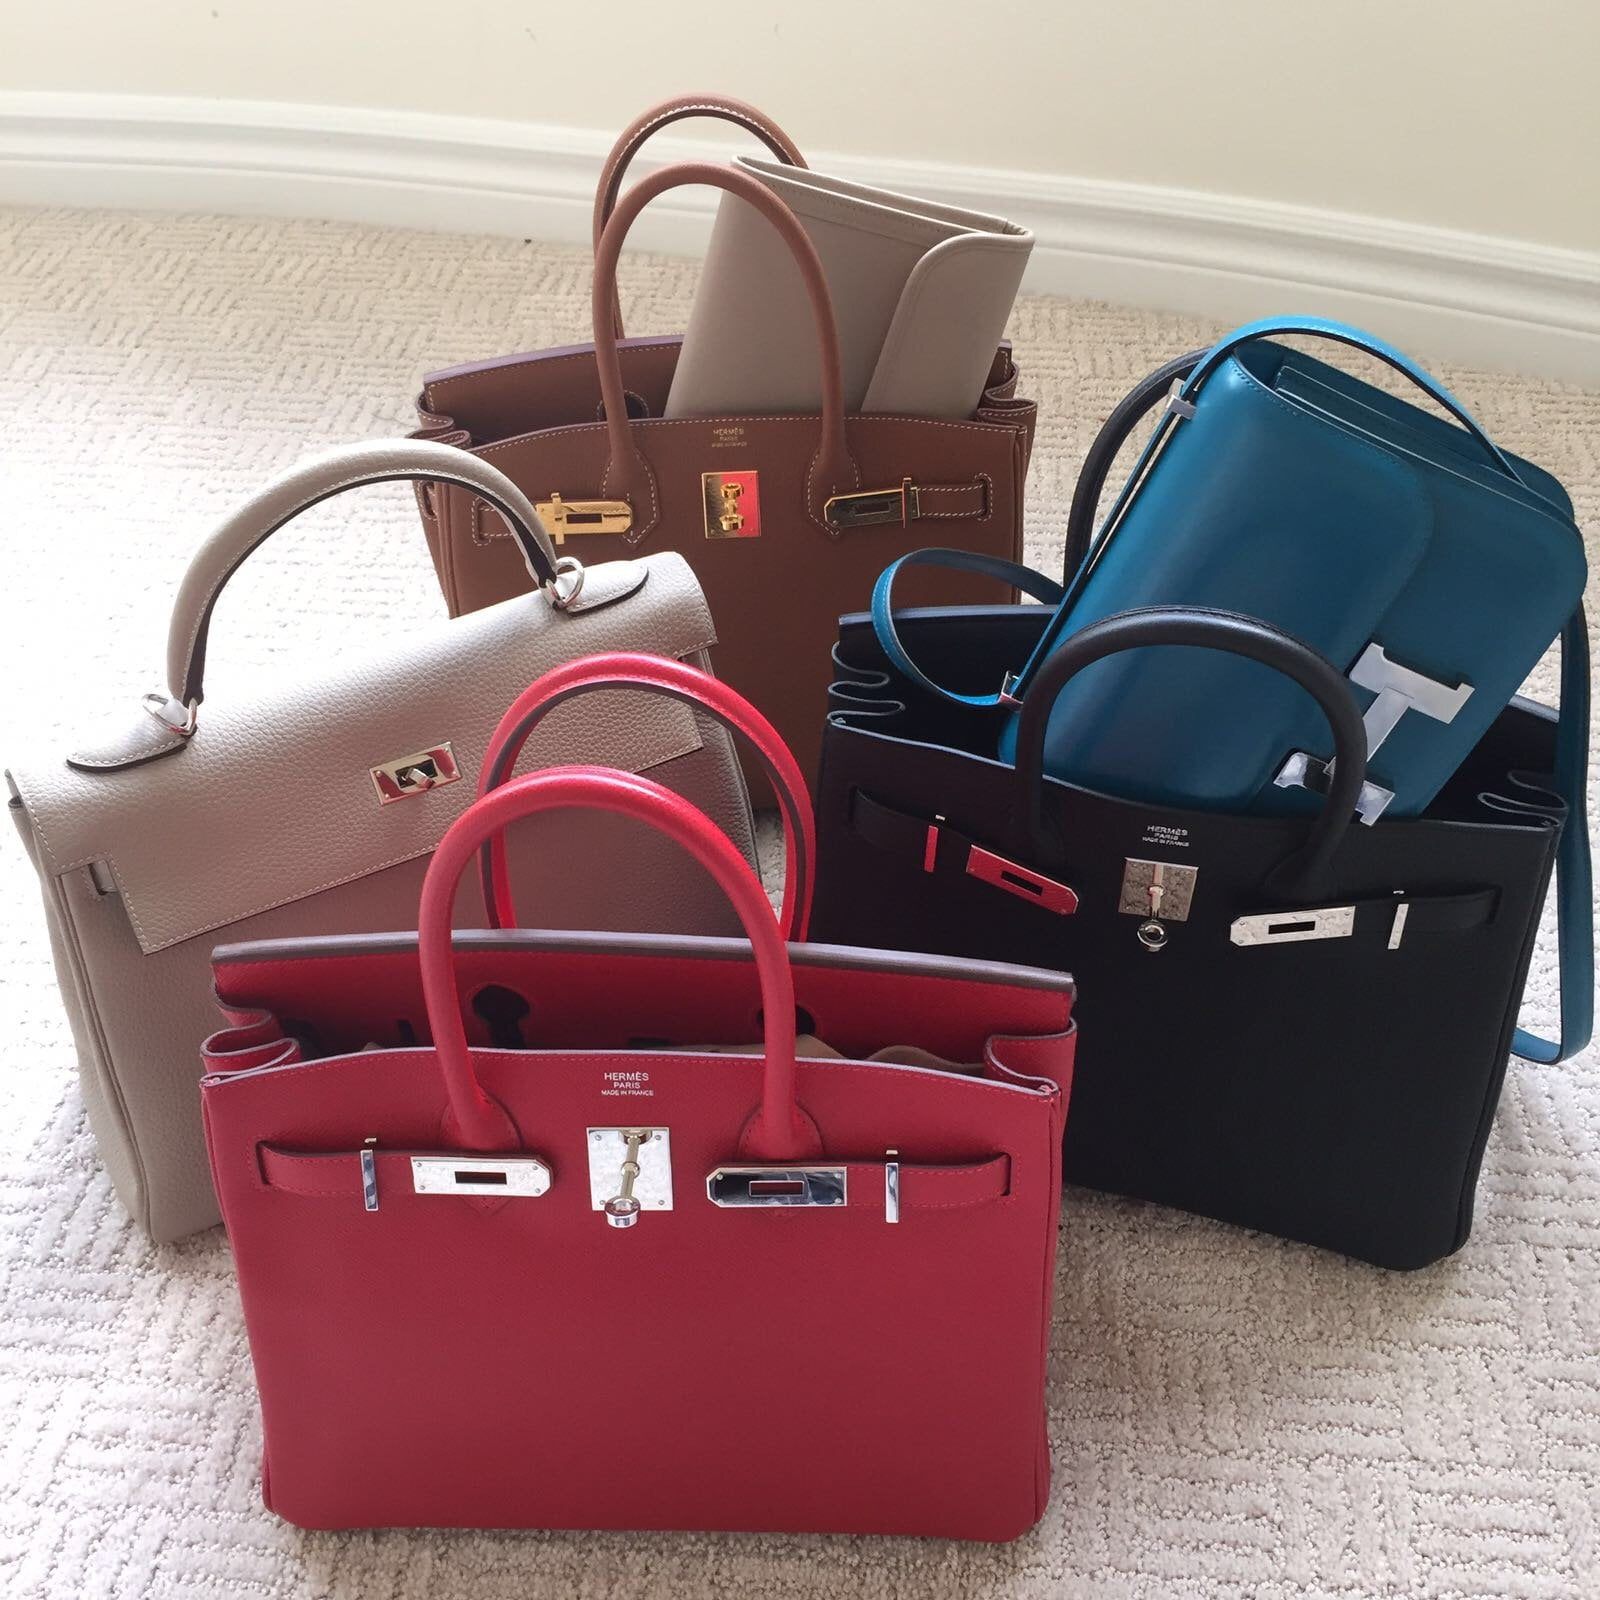 Can't decide which to get : r/handbags